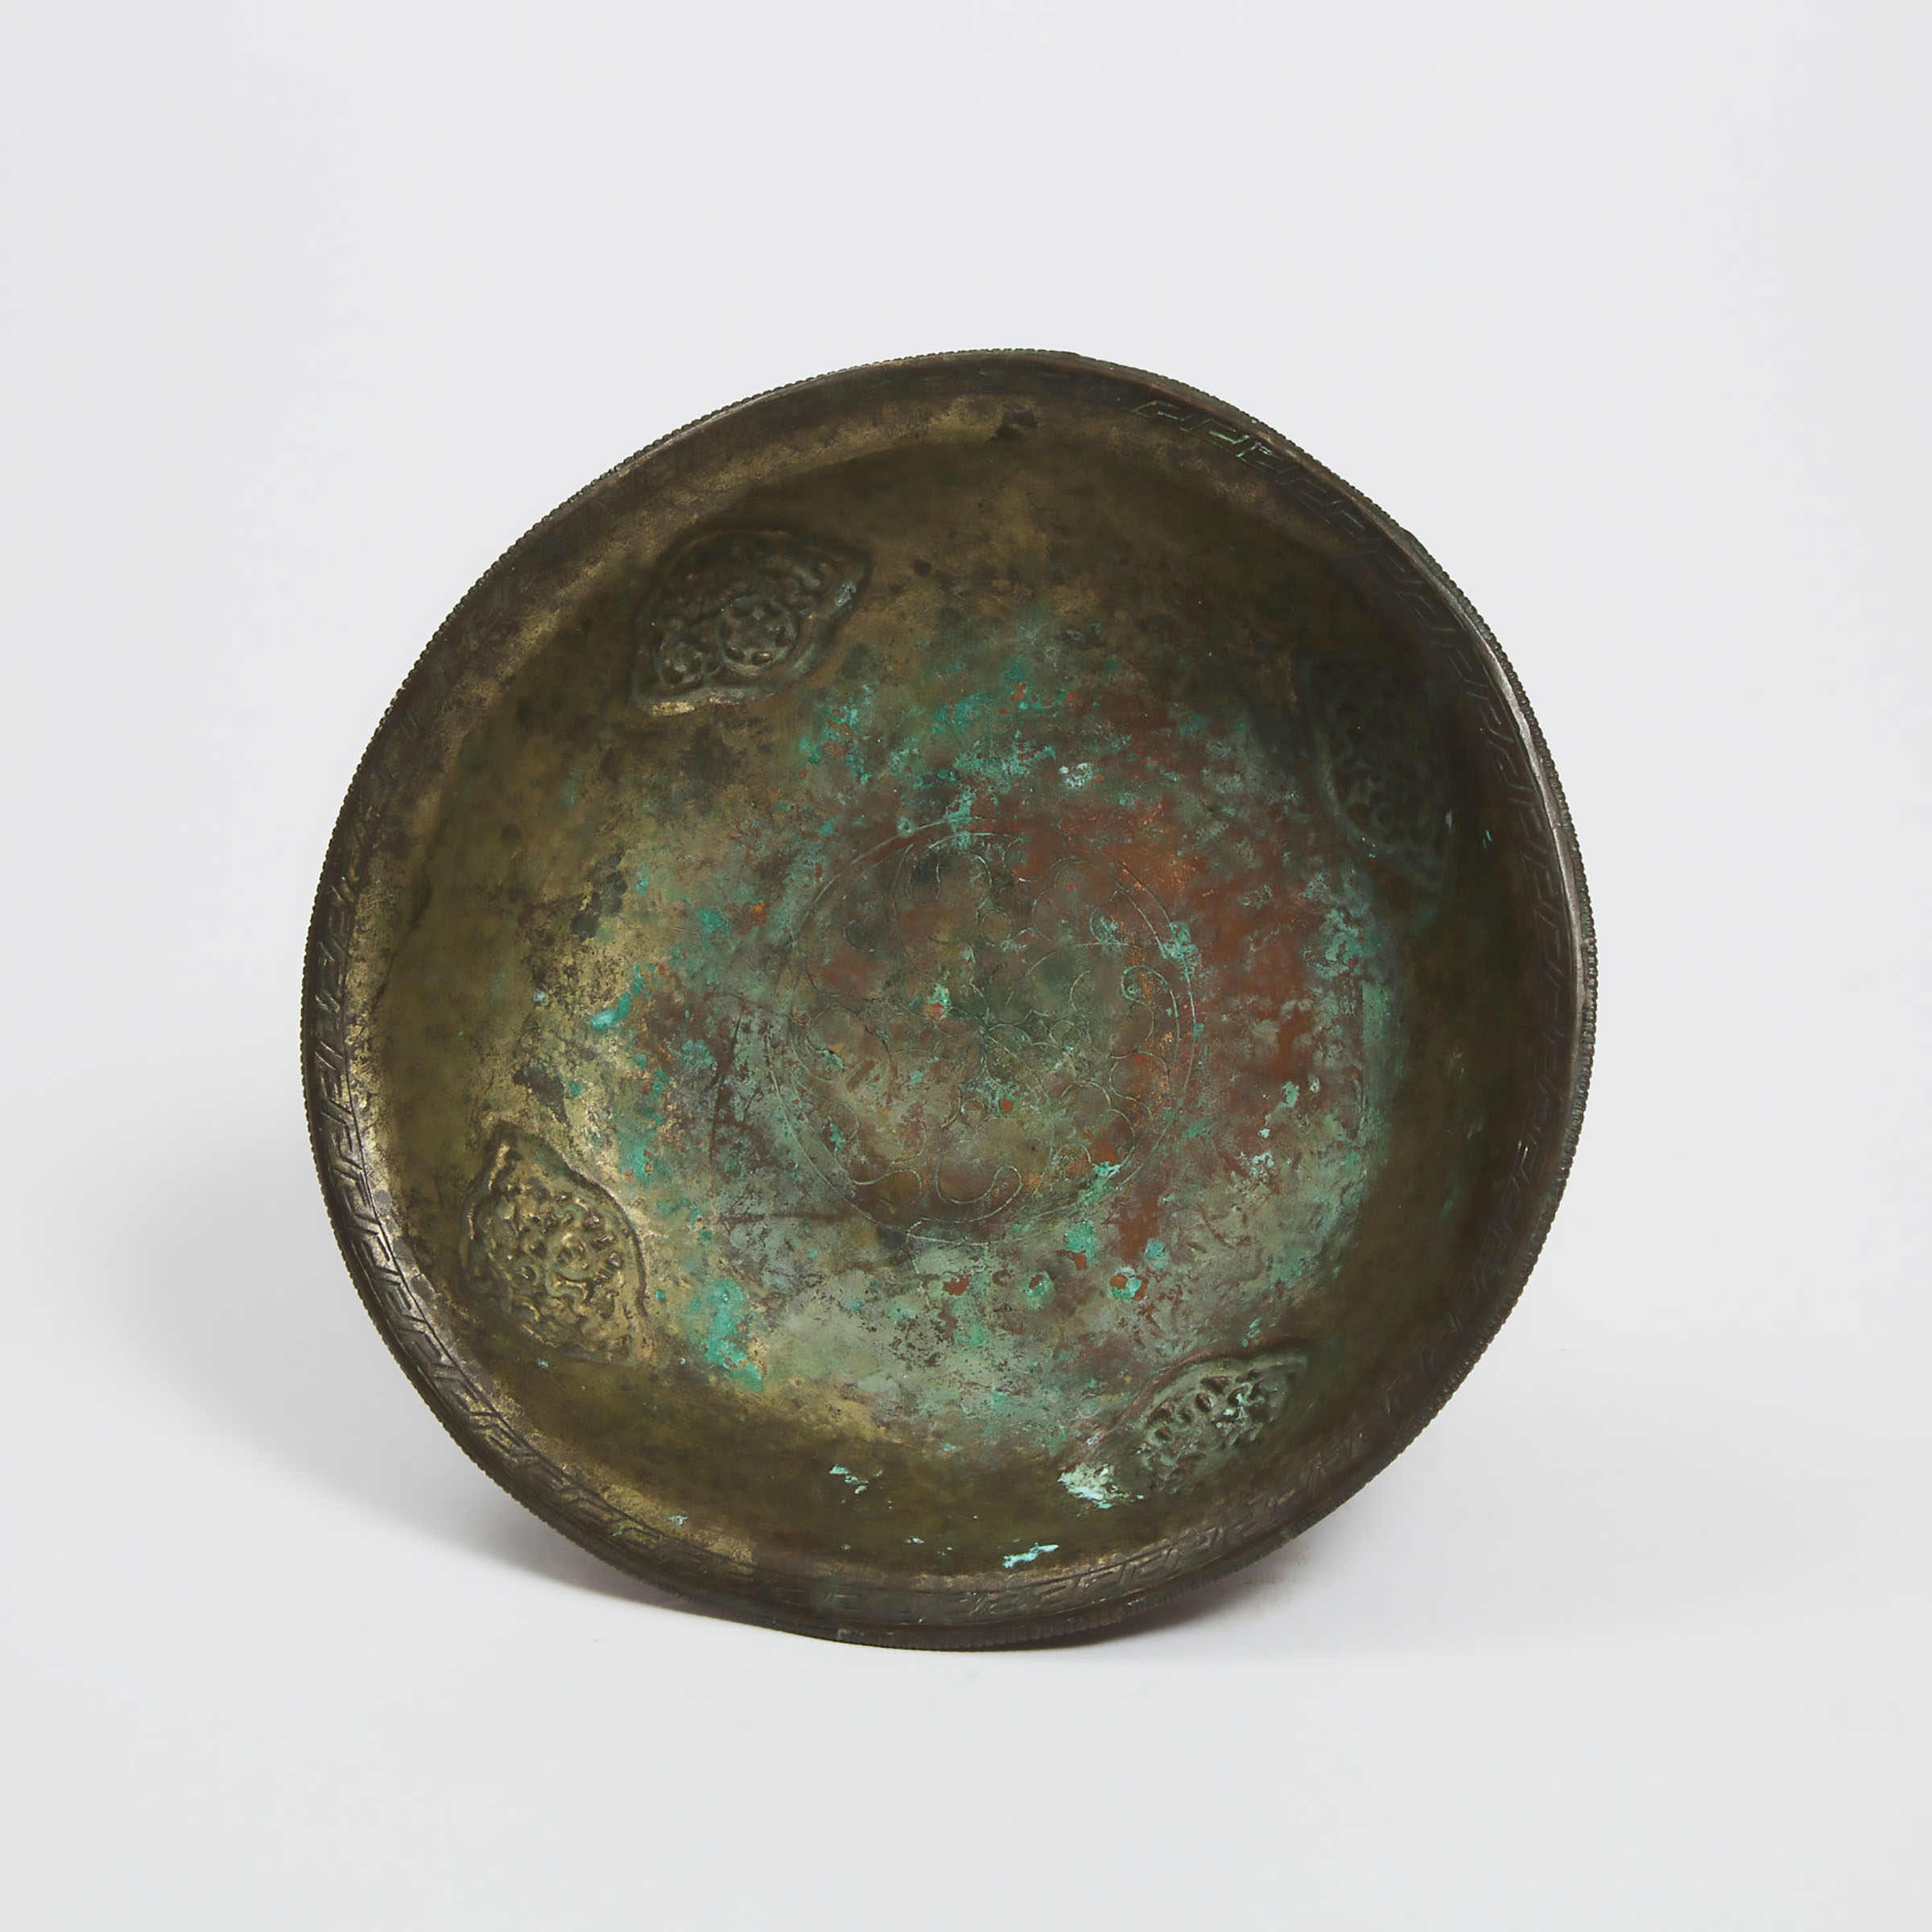 A Tibetan Copper Footed Dish, 11th Century or Later